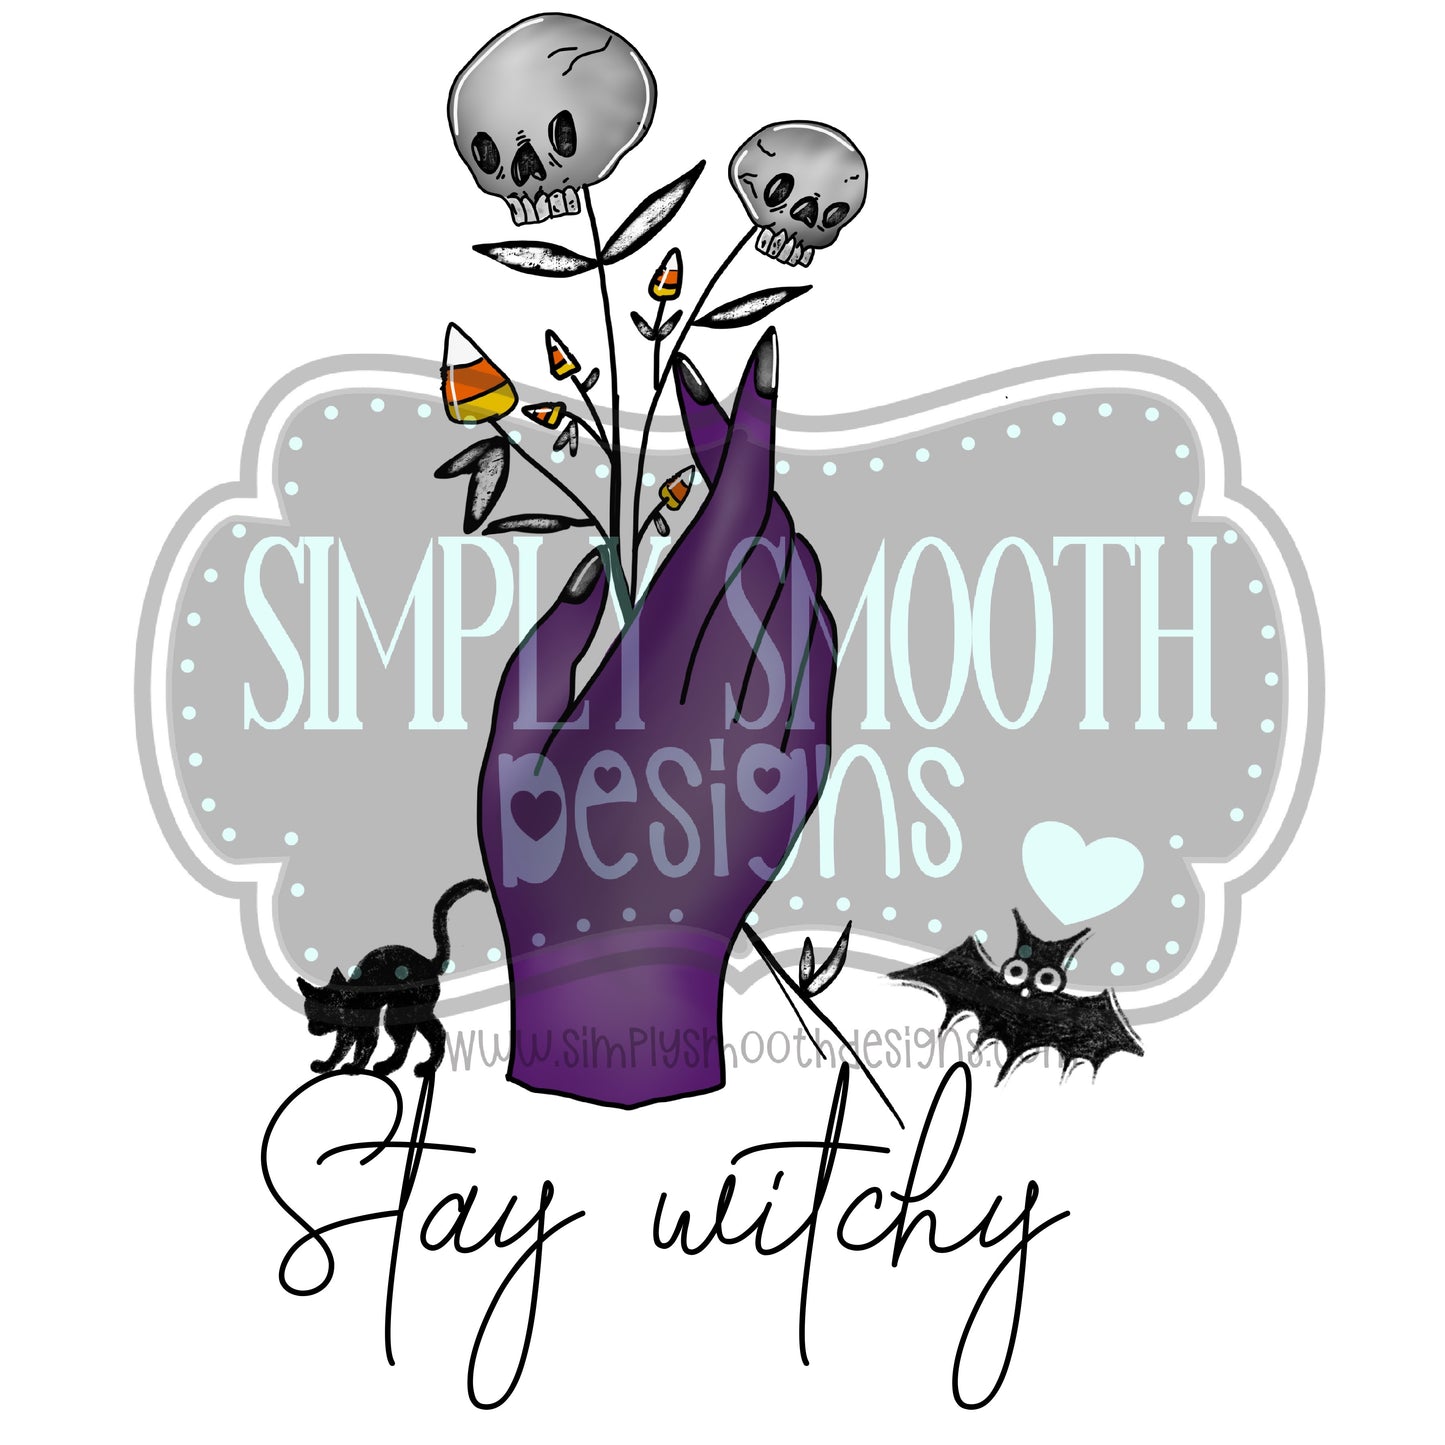 Stay witchy halloween